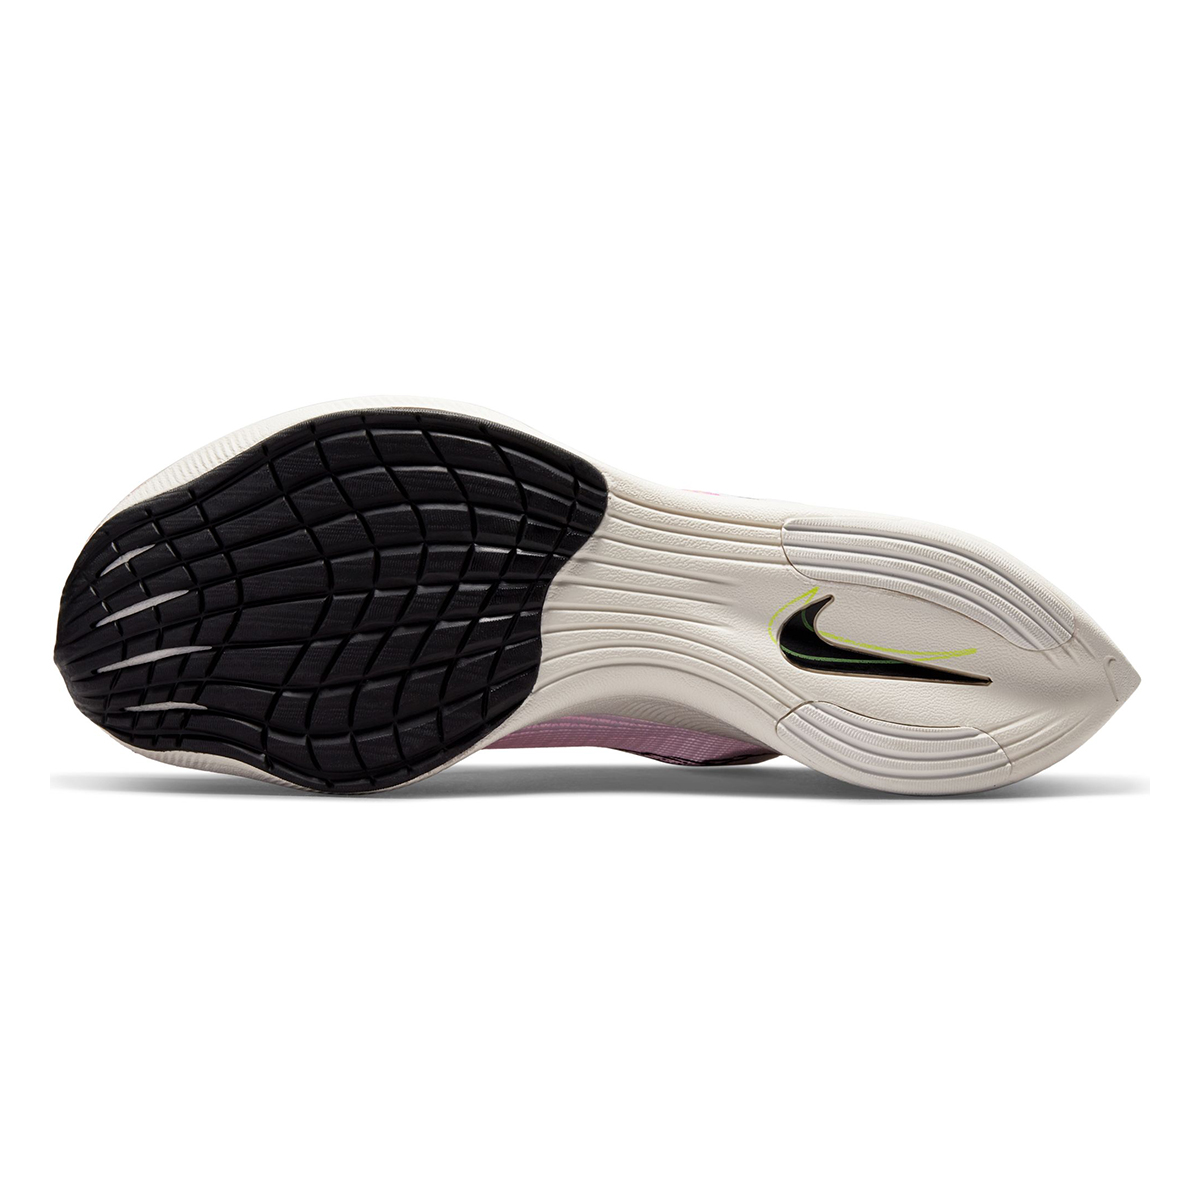 Nike ZoomX Vaporfly Next% 2, , large image number null